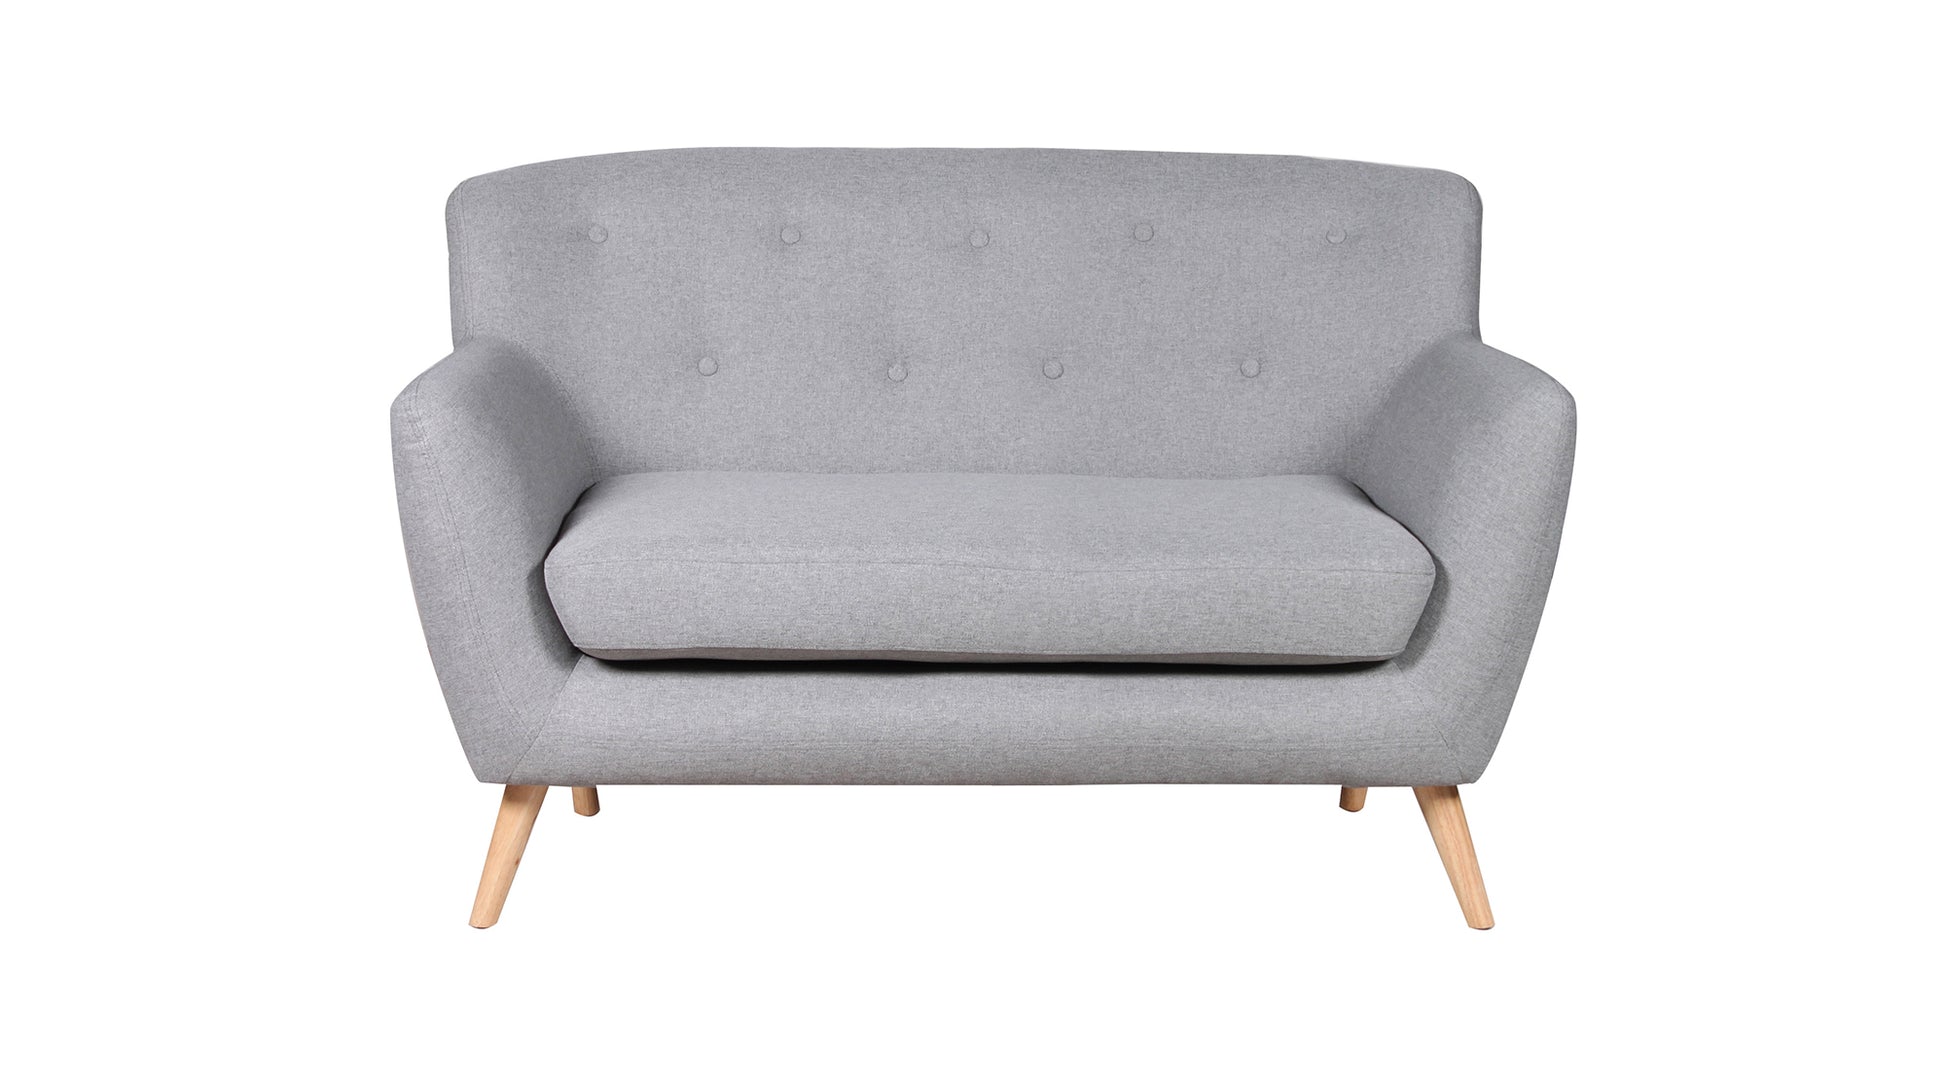 Commercial Grade Woven Fabric Minimalist Settee. 1,2,3 Seat Sofa Available in dark grey, light grey, teal *** - CasaFenix